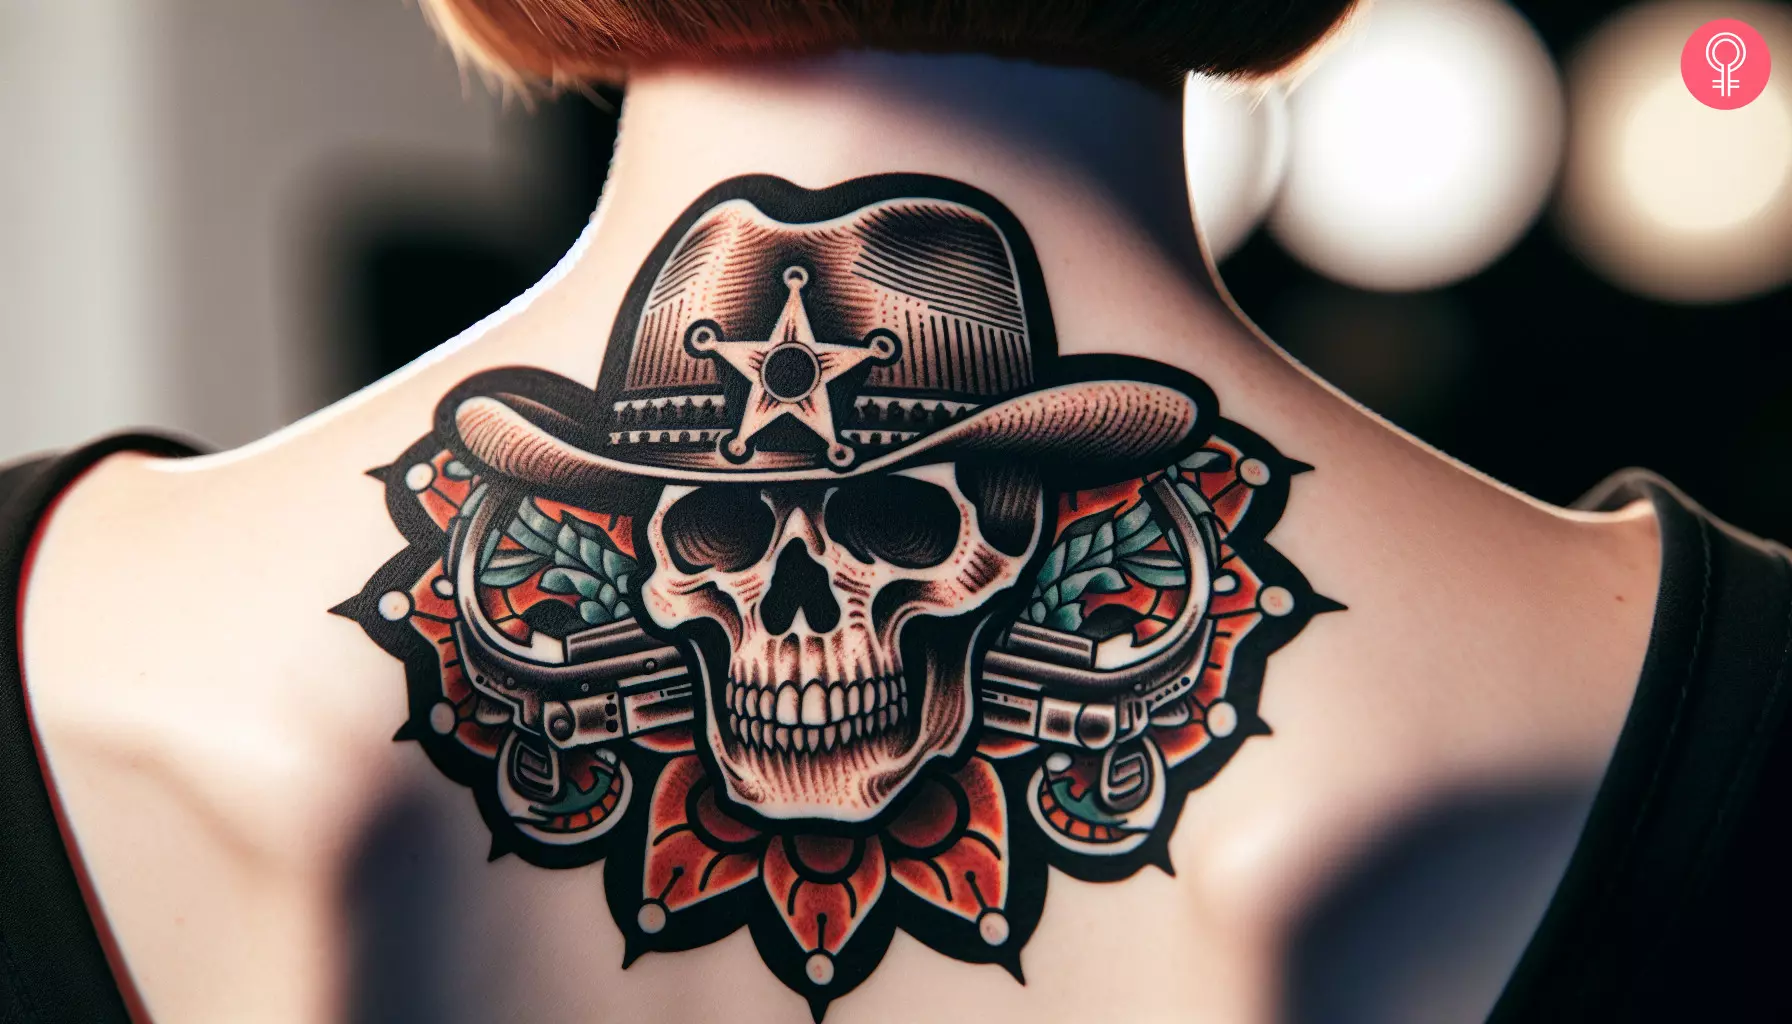 Woman with cowboy skull tattoo on her upper back